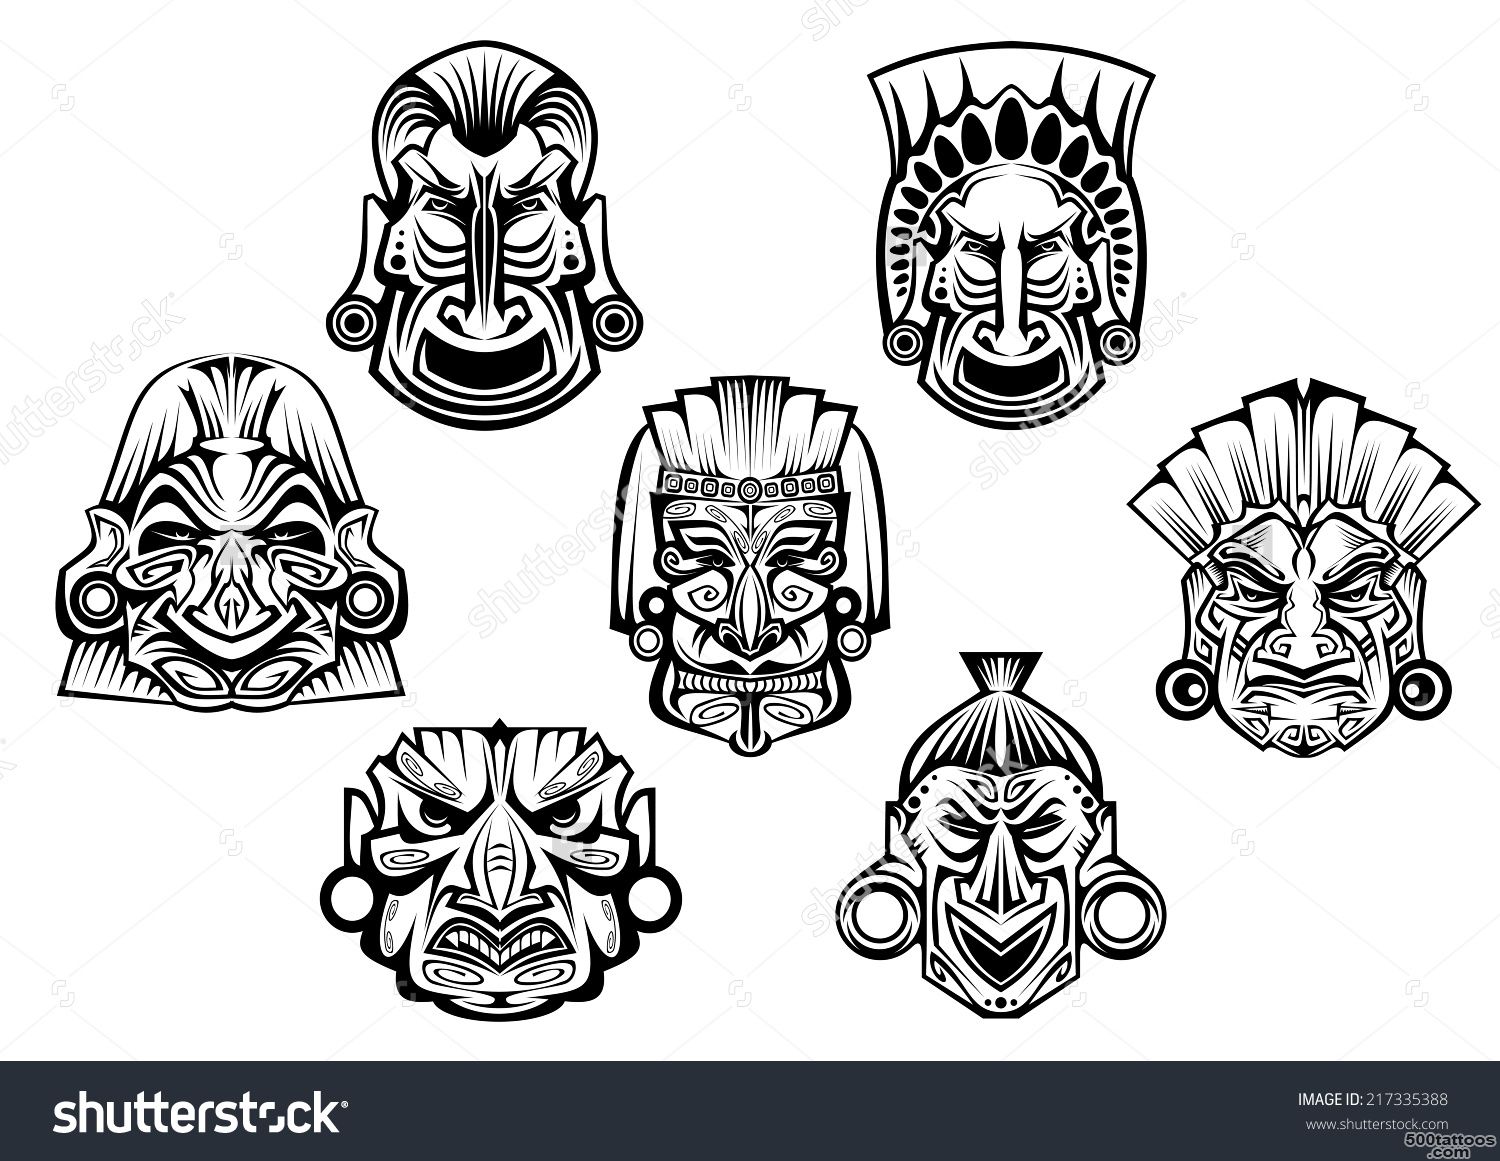 Religious Masks In Ancient Tribal Style Isolated On White For ..._31